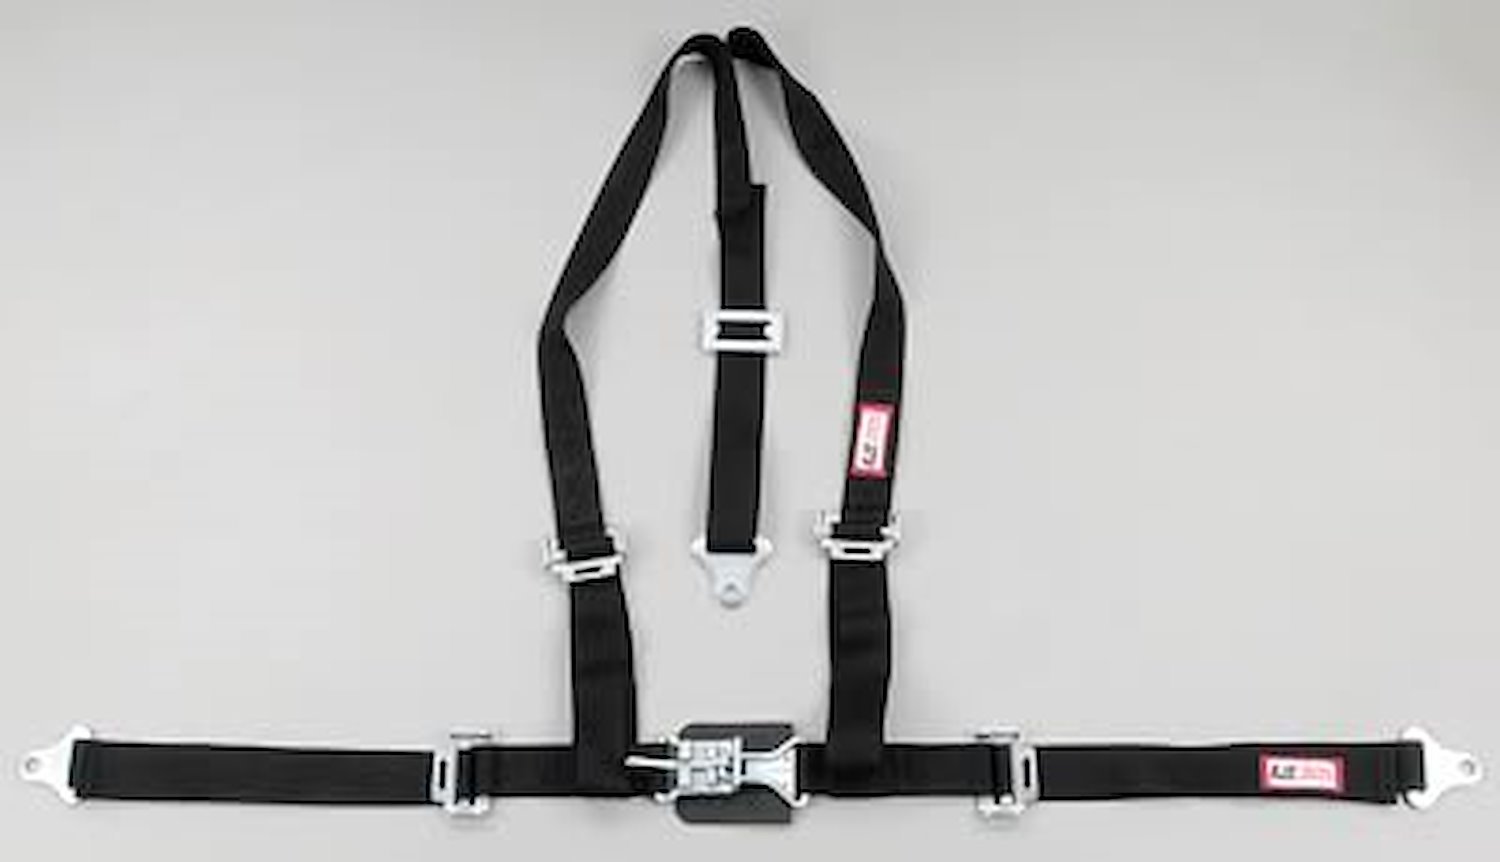 NON-SFI L&L HARNESS 3 PULL DOWN Lap Belt SEWN IN 2 Shoulder Harness V ROLL BAR Mount w/STERNUM STRAP ALL SNAP ENDS HOT PINK